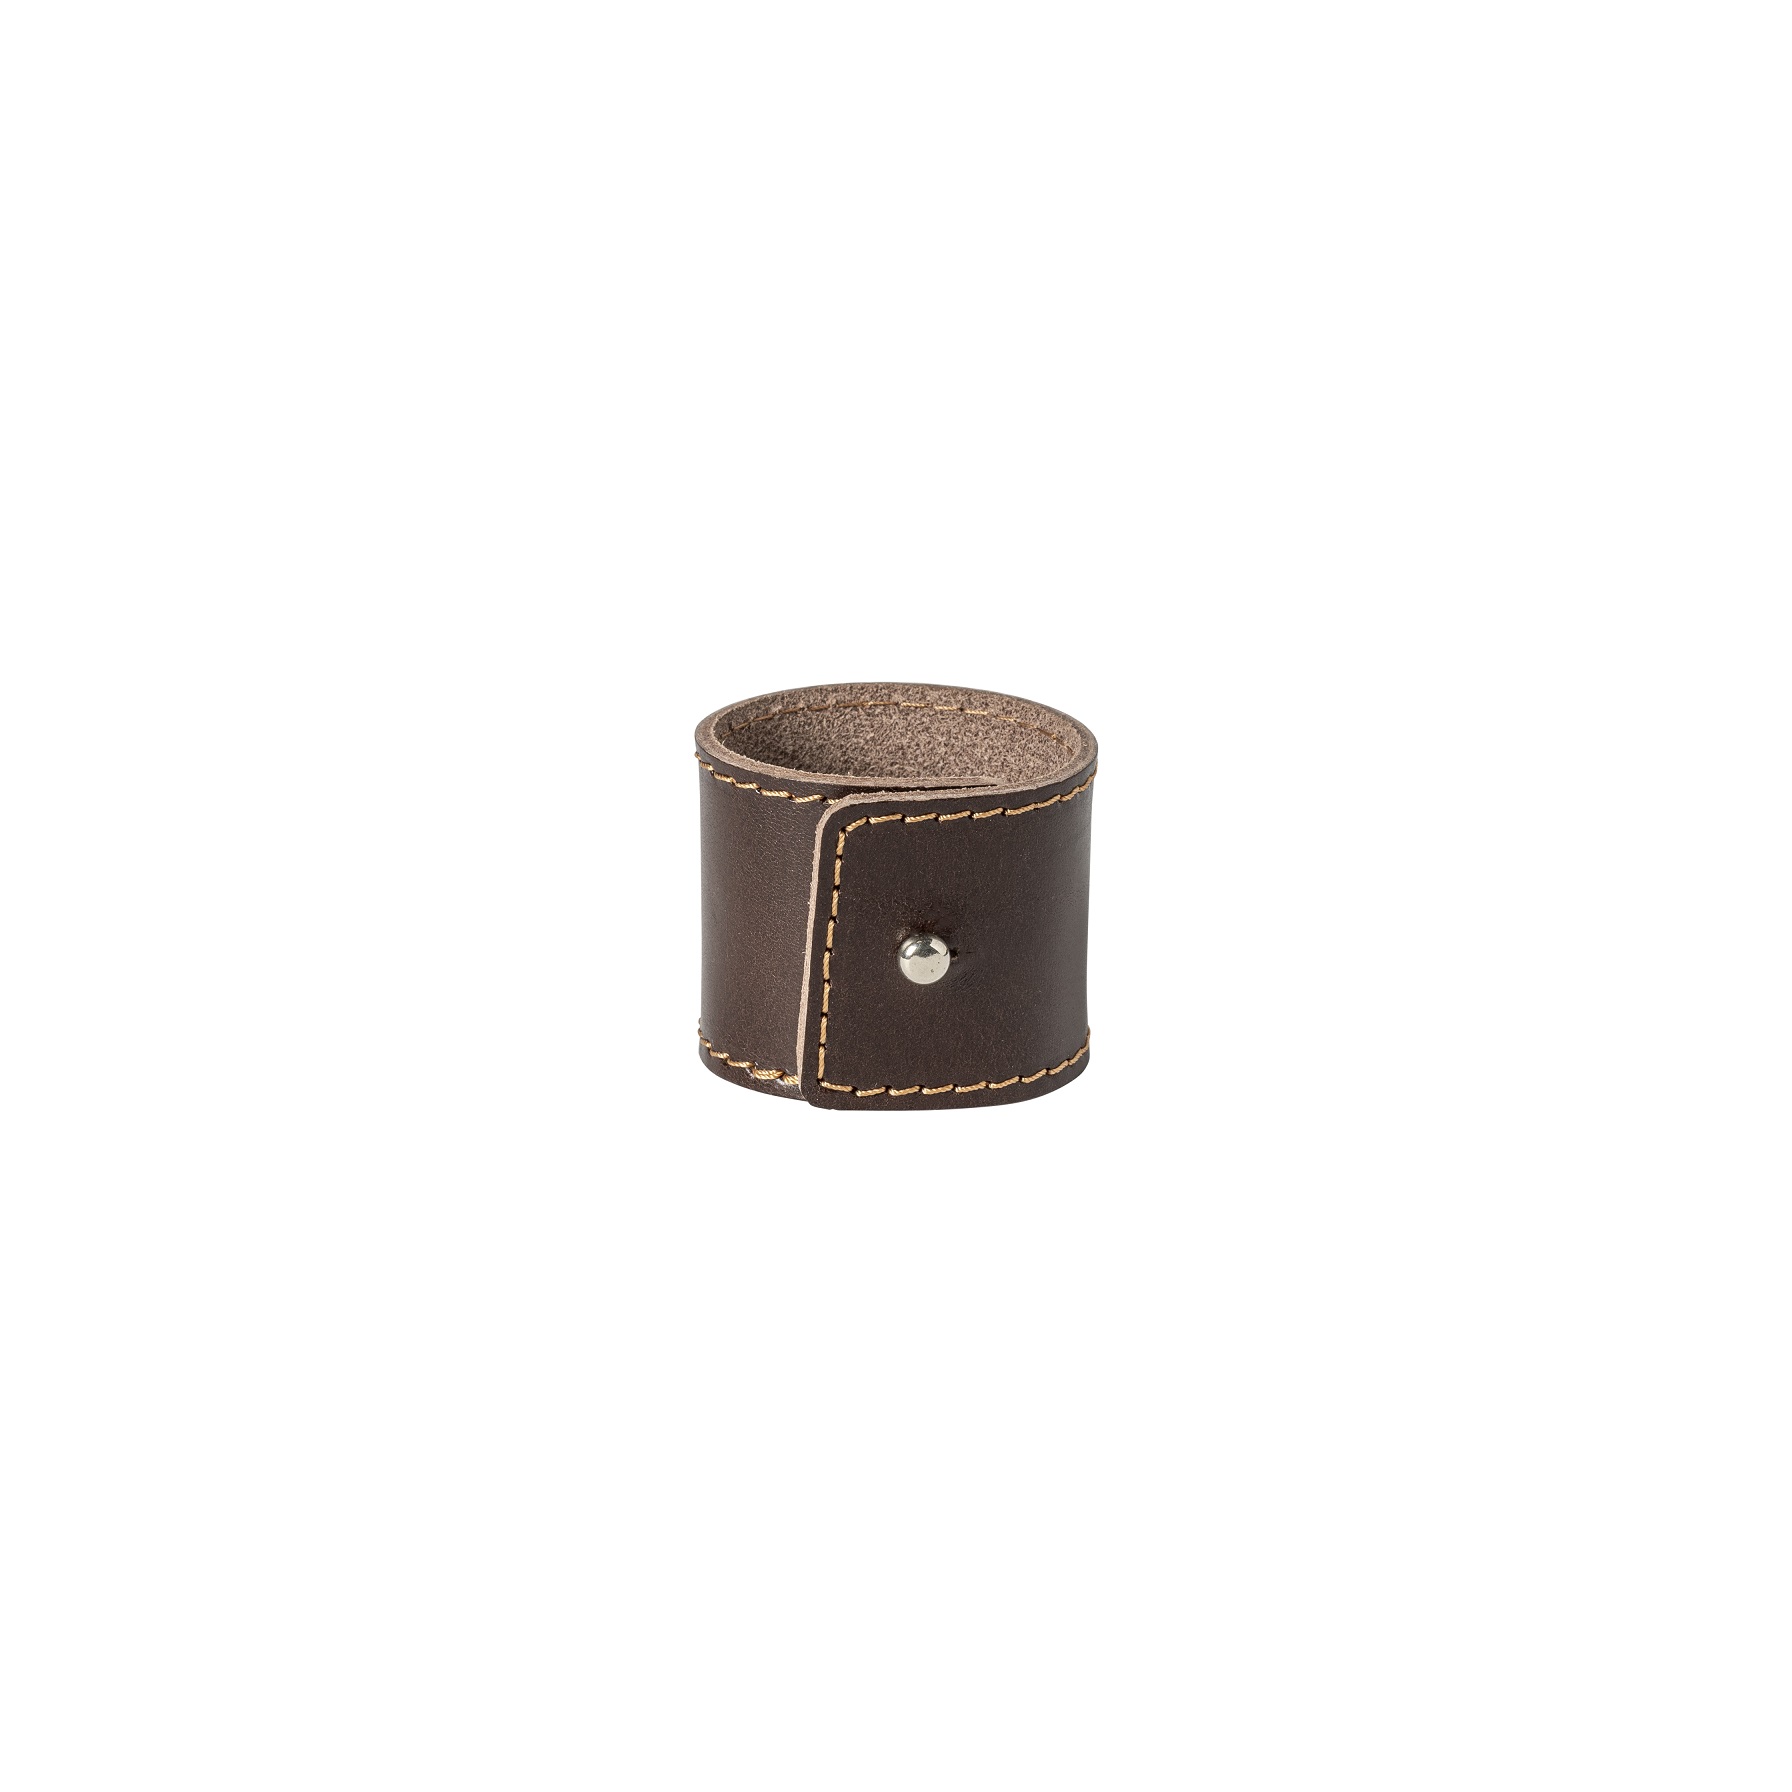 Napkin Rings Set 4 Leather Brown 5x4.5cm Gift